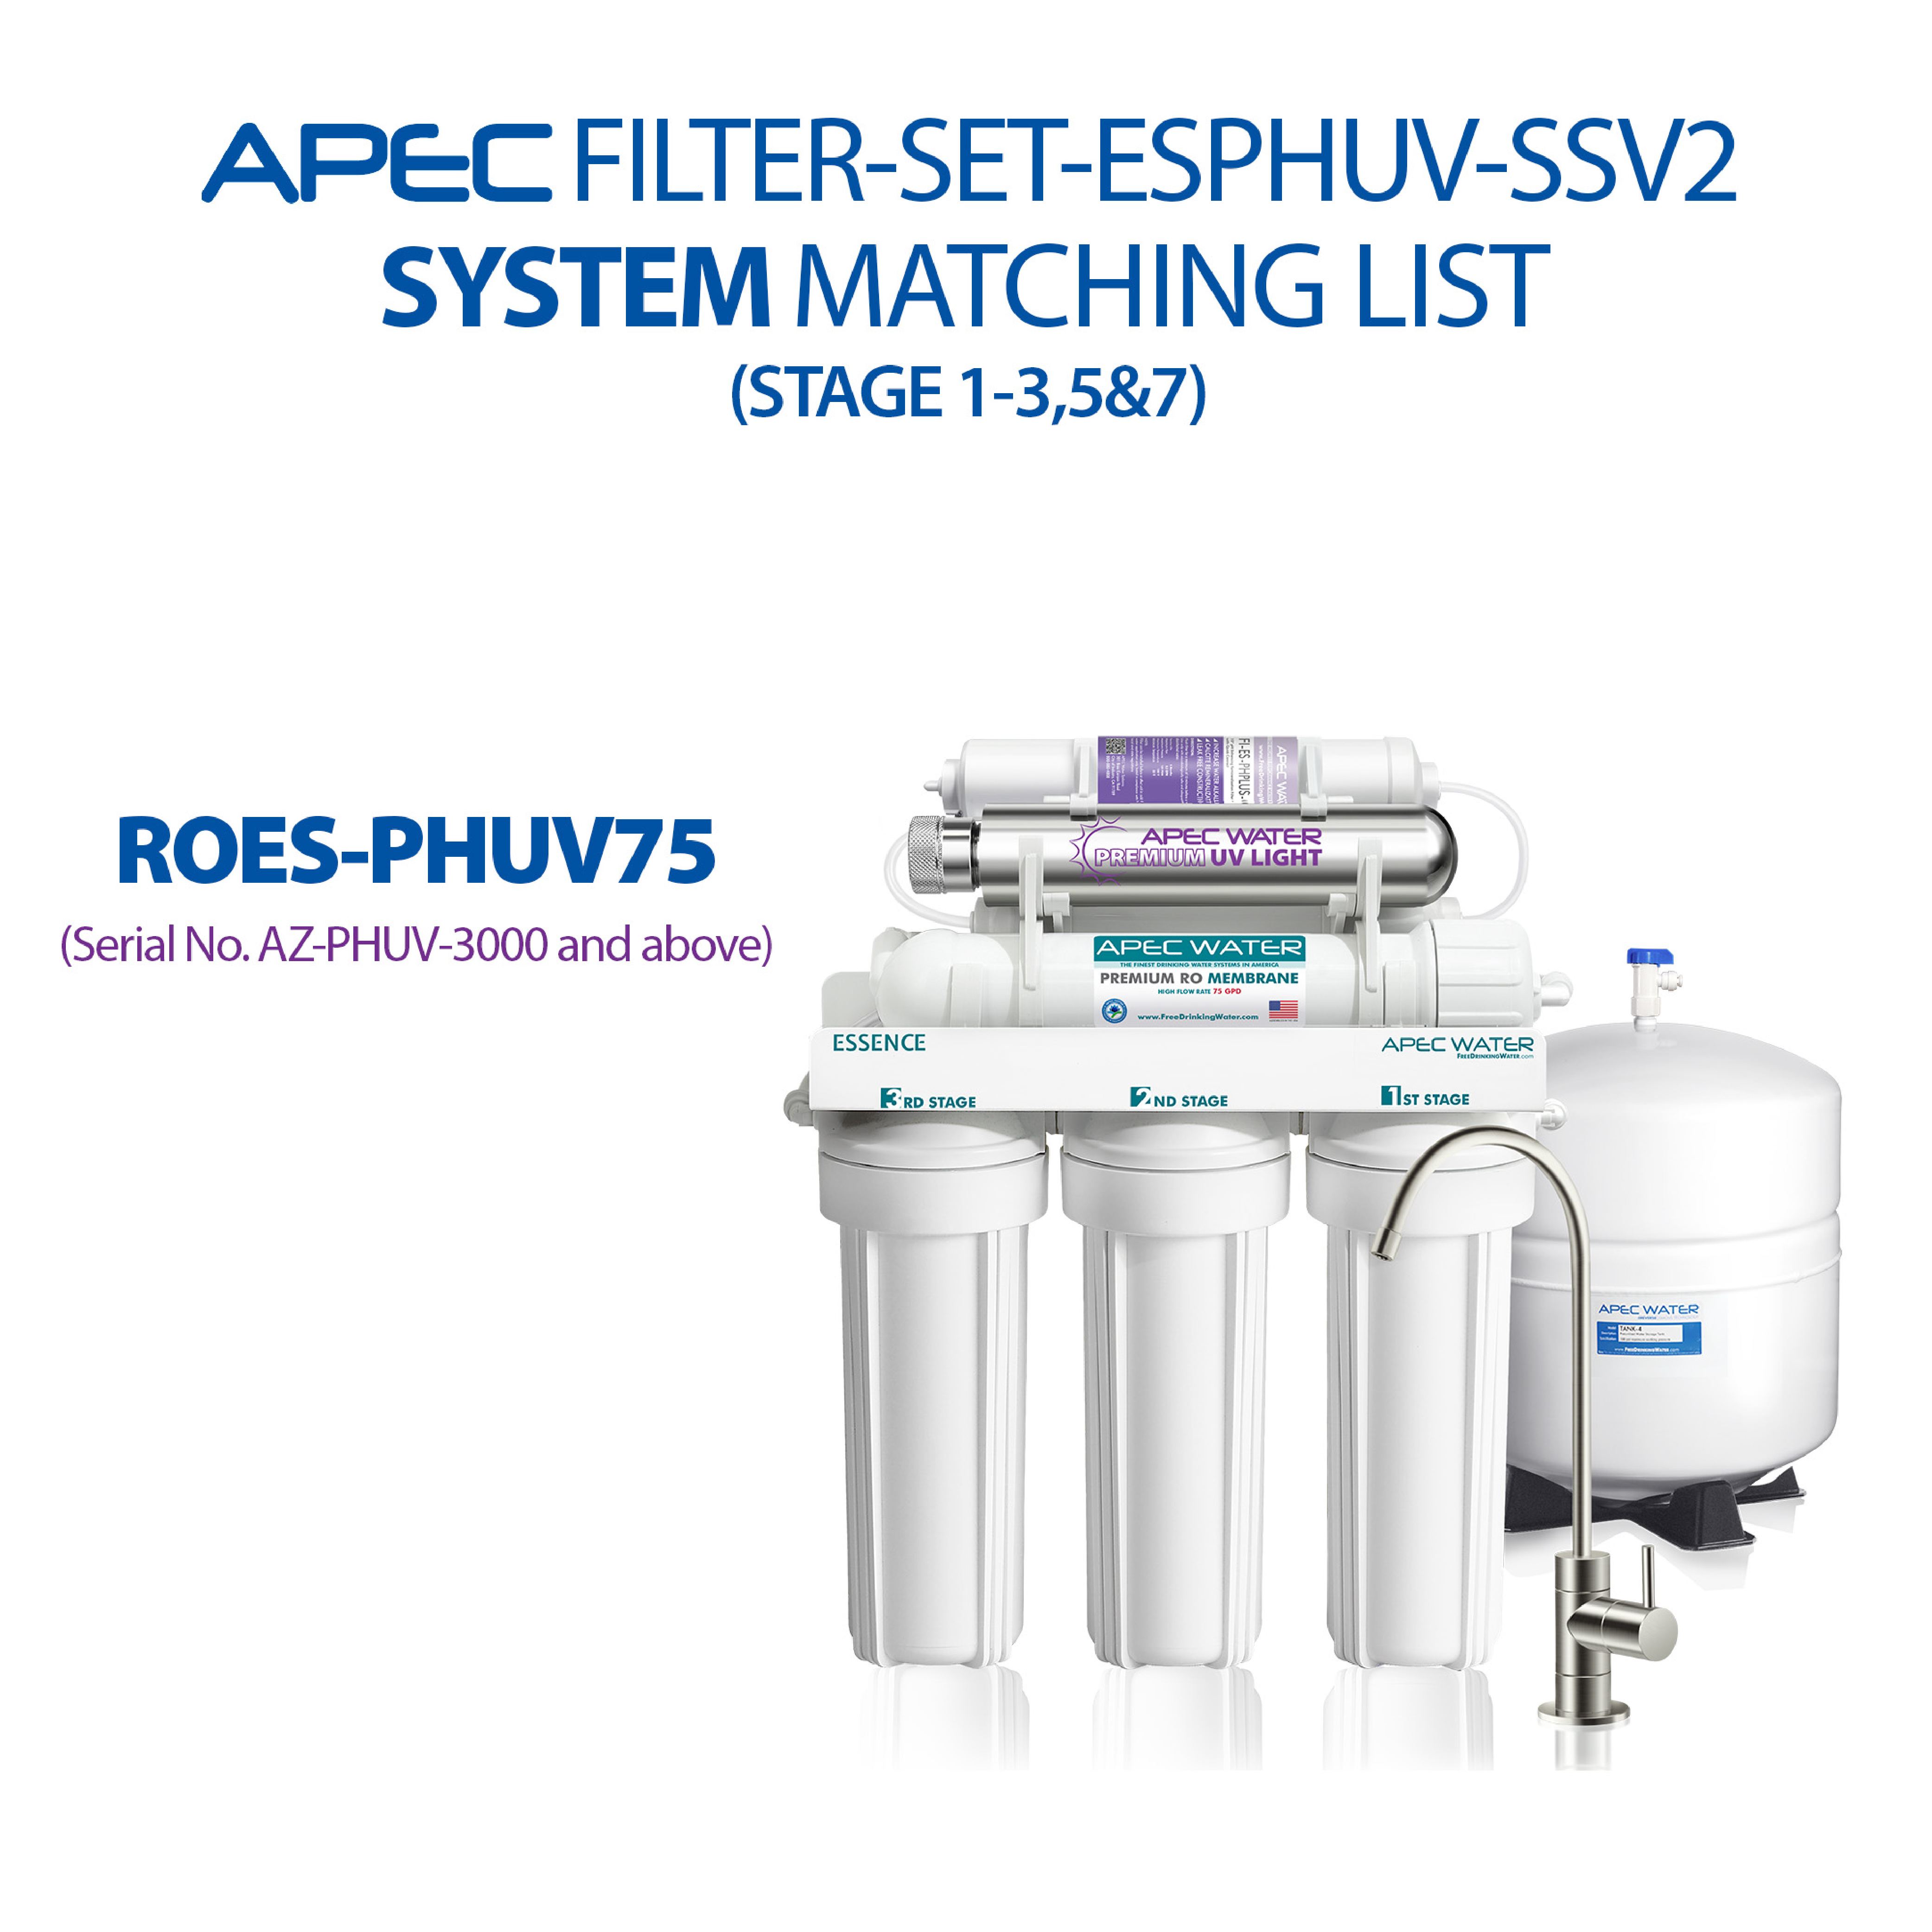 APEC 75 GPD High Capacity Pre-Filter Set For ESSENCE ROES-PHUV75 Reverse Osmosis Systems Stages 1-3, 5 And 7 (FILTER-SET-ESPHUV-SSV2 ) - image 3 of 9